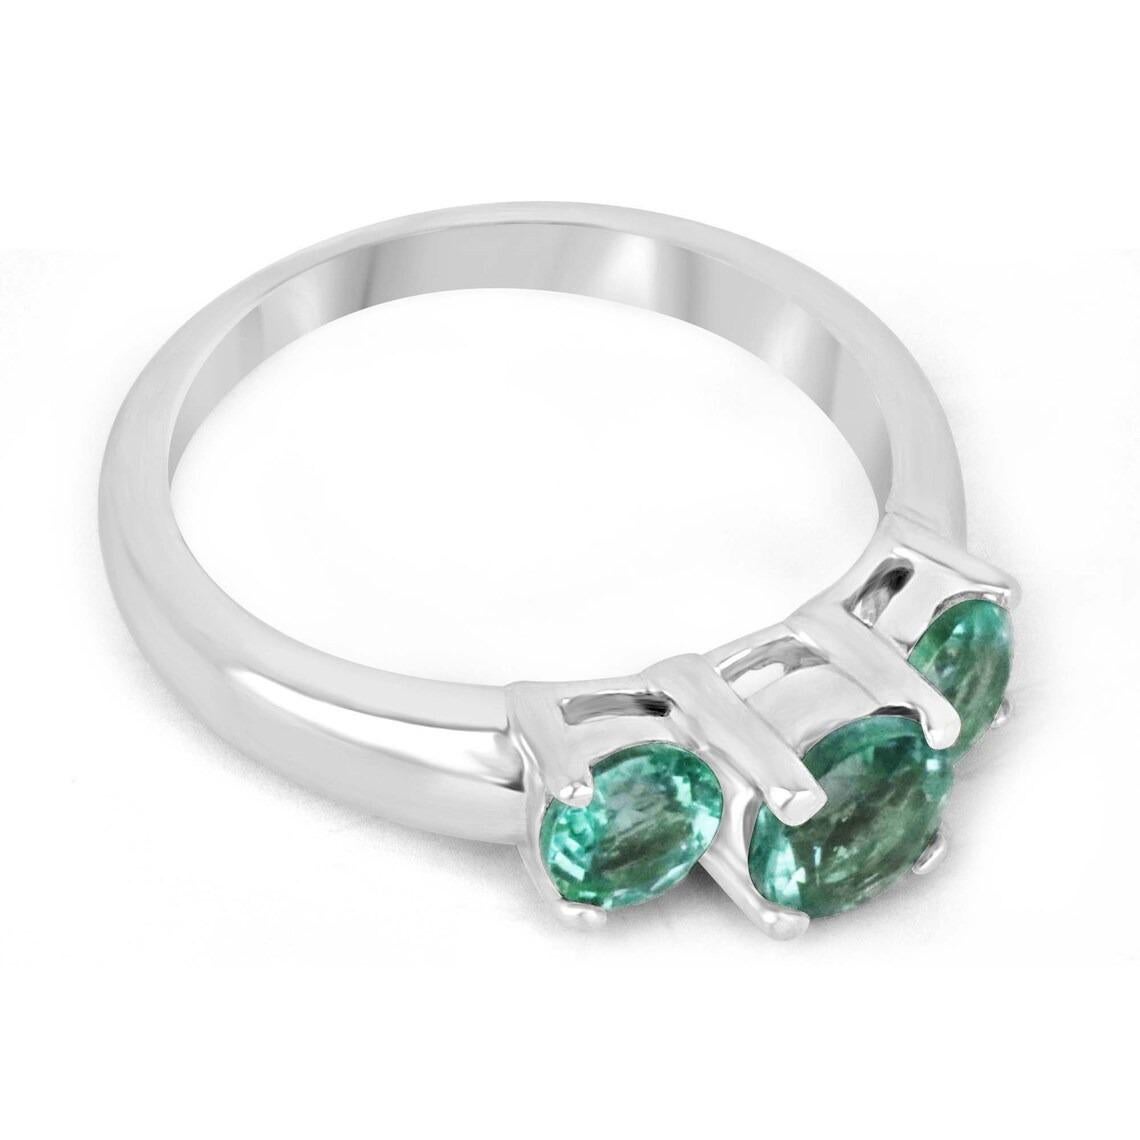 This emerald three-stone ring showcases a trio of round-cut emeralds, each possessing a captivating medium-green hue with remarkable characteristics. The emeralds exhibit eye-clean clarity and boast excellent luster, creating a mesmerizing display